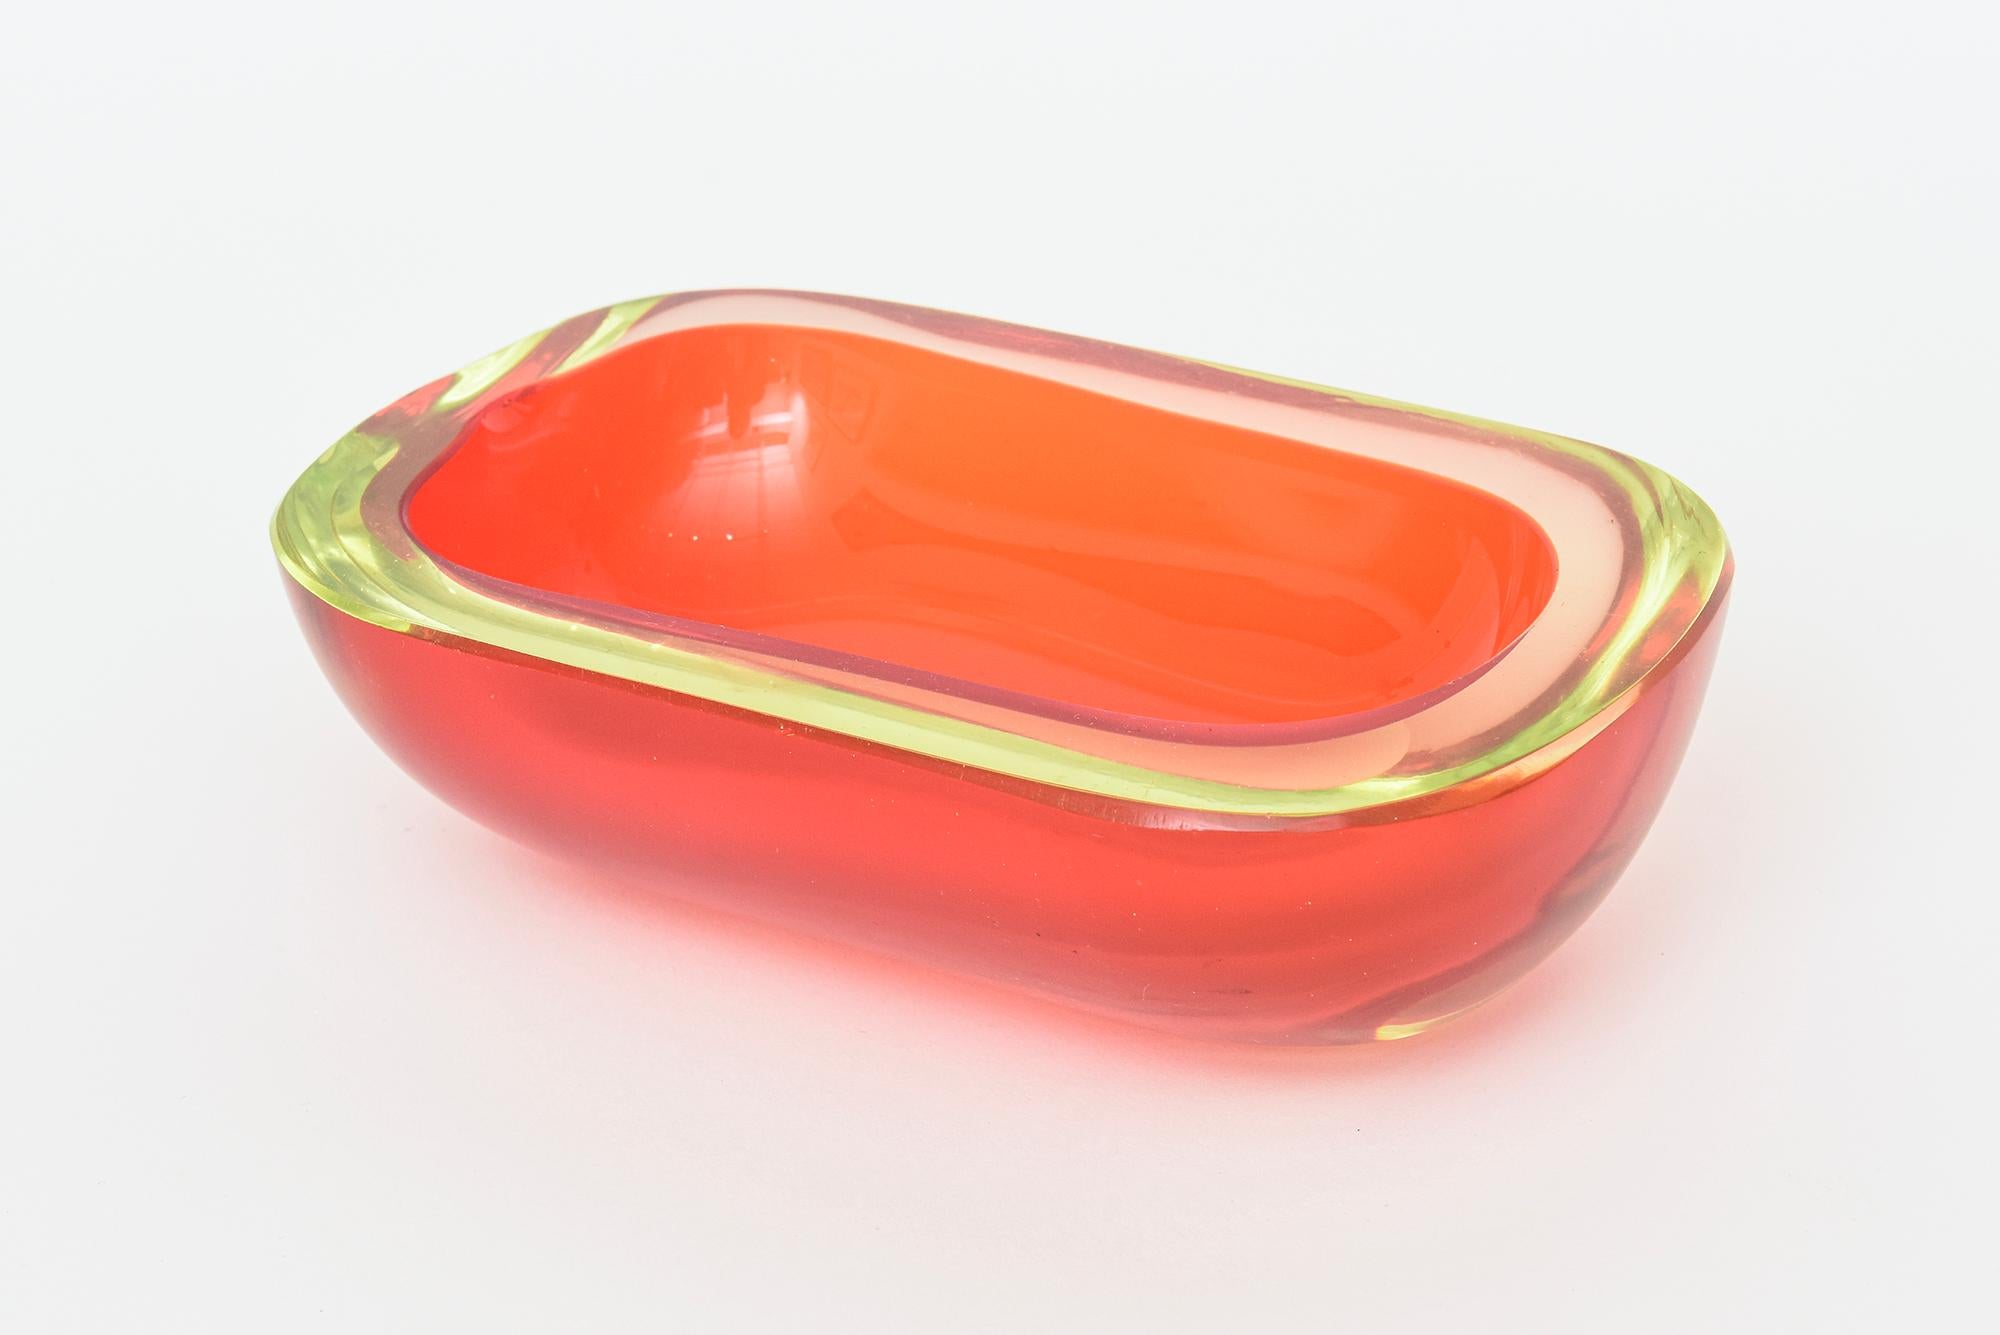 Vintage Flavio Poli Murano Red and Yellow Uranium Sommerso Oblong Glass Bowl For Sale 2